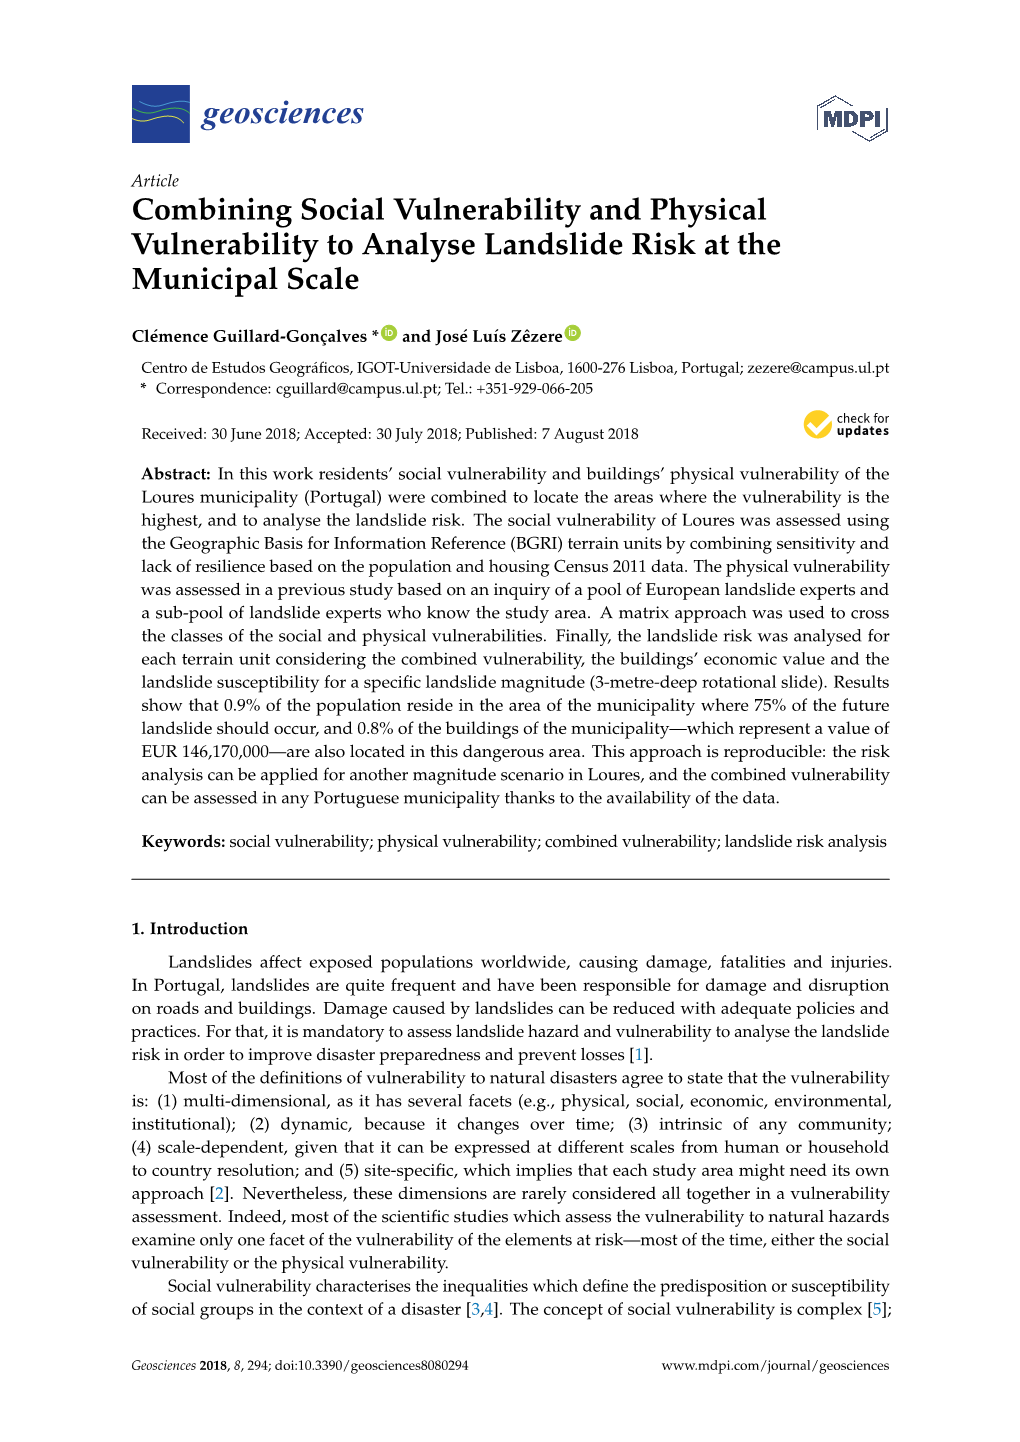 Combining Social Vulnerability and Physical Vulnerability to Analyse Landslide Risk at the Municipal Scale